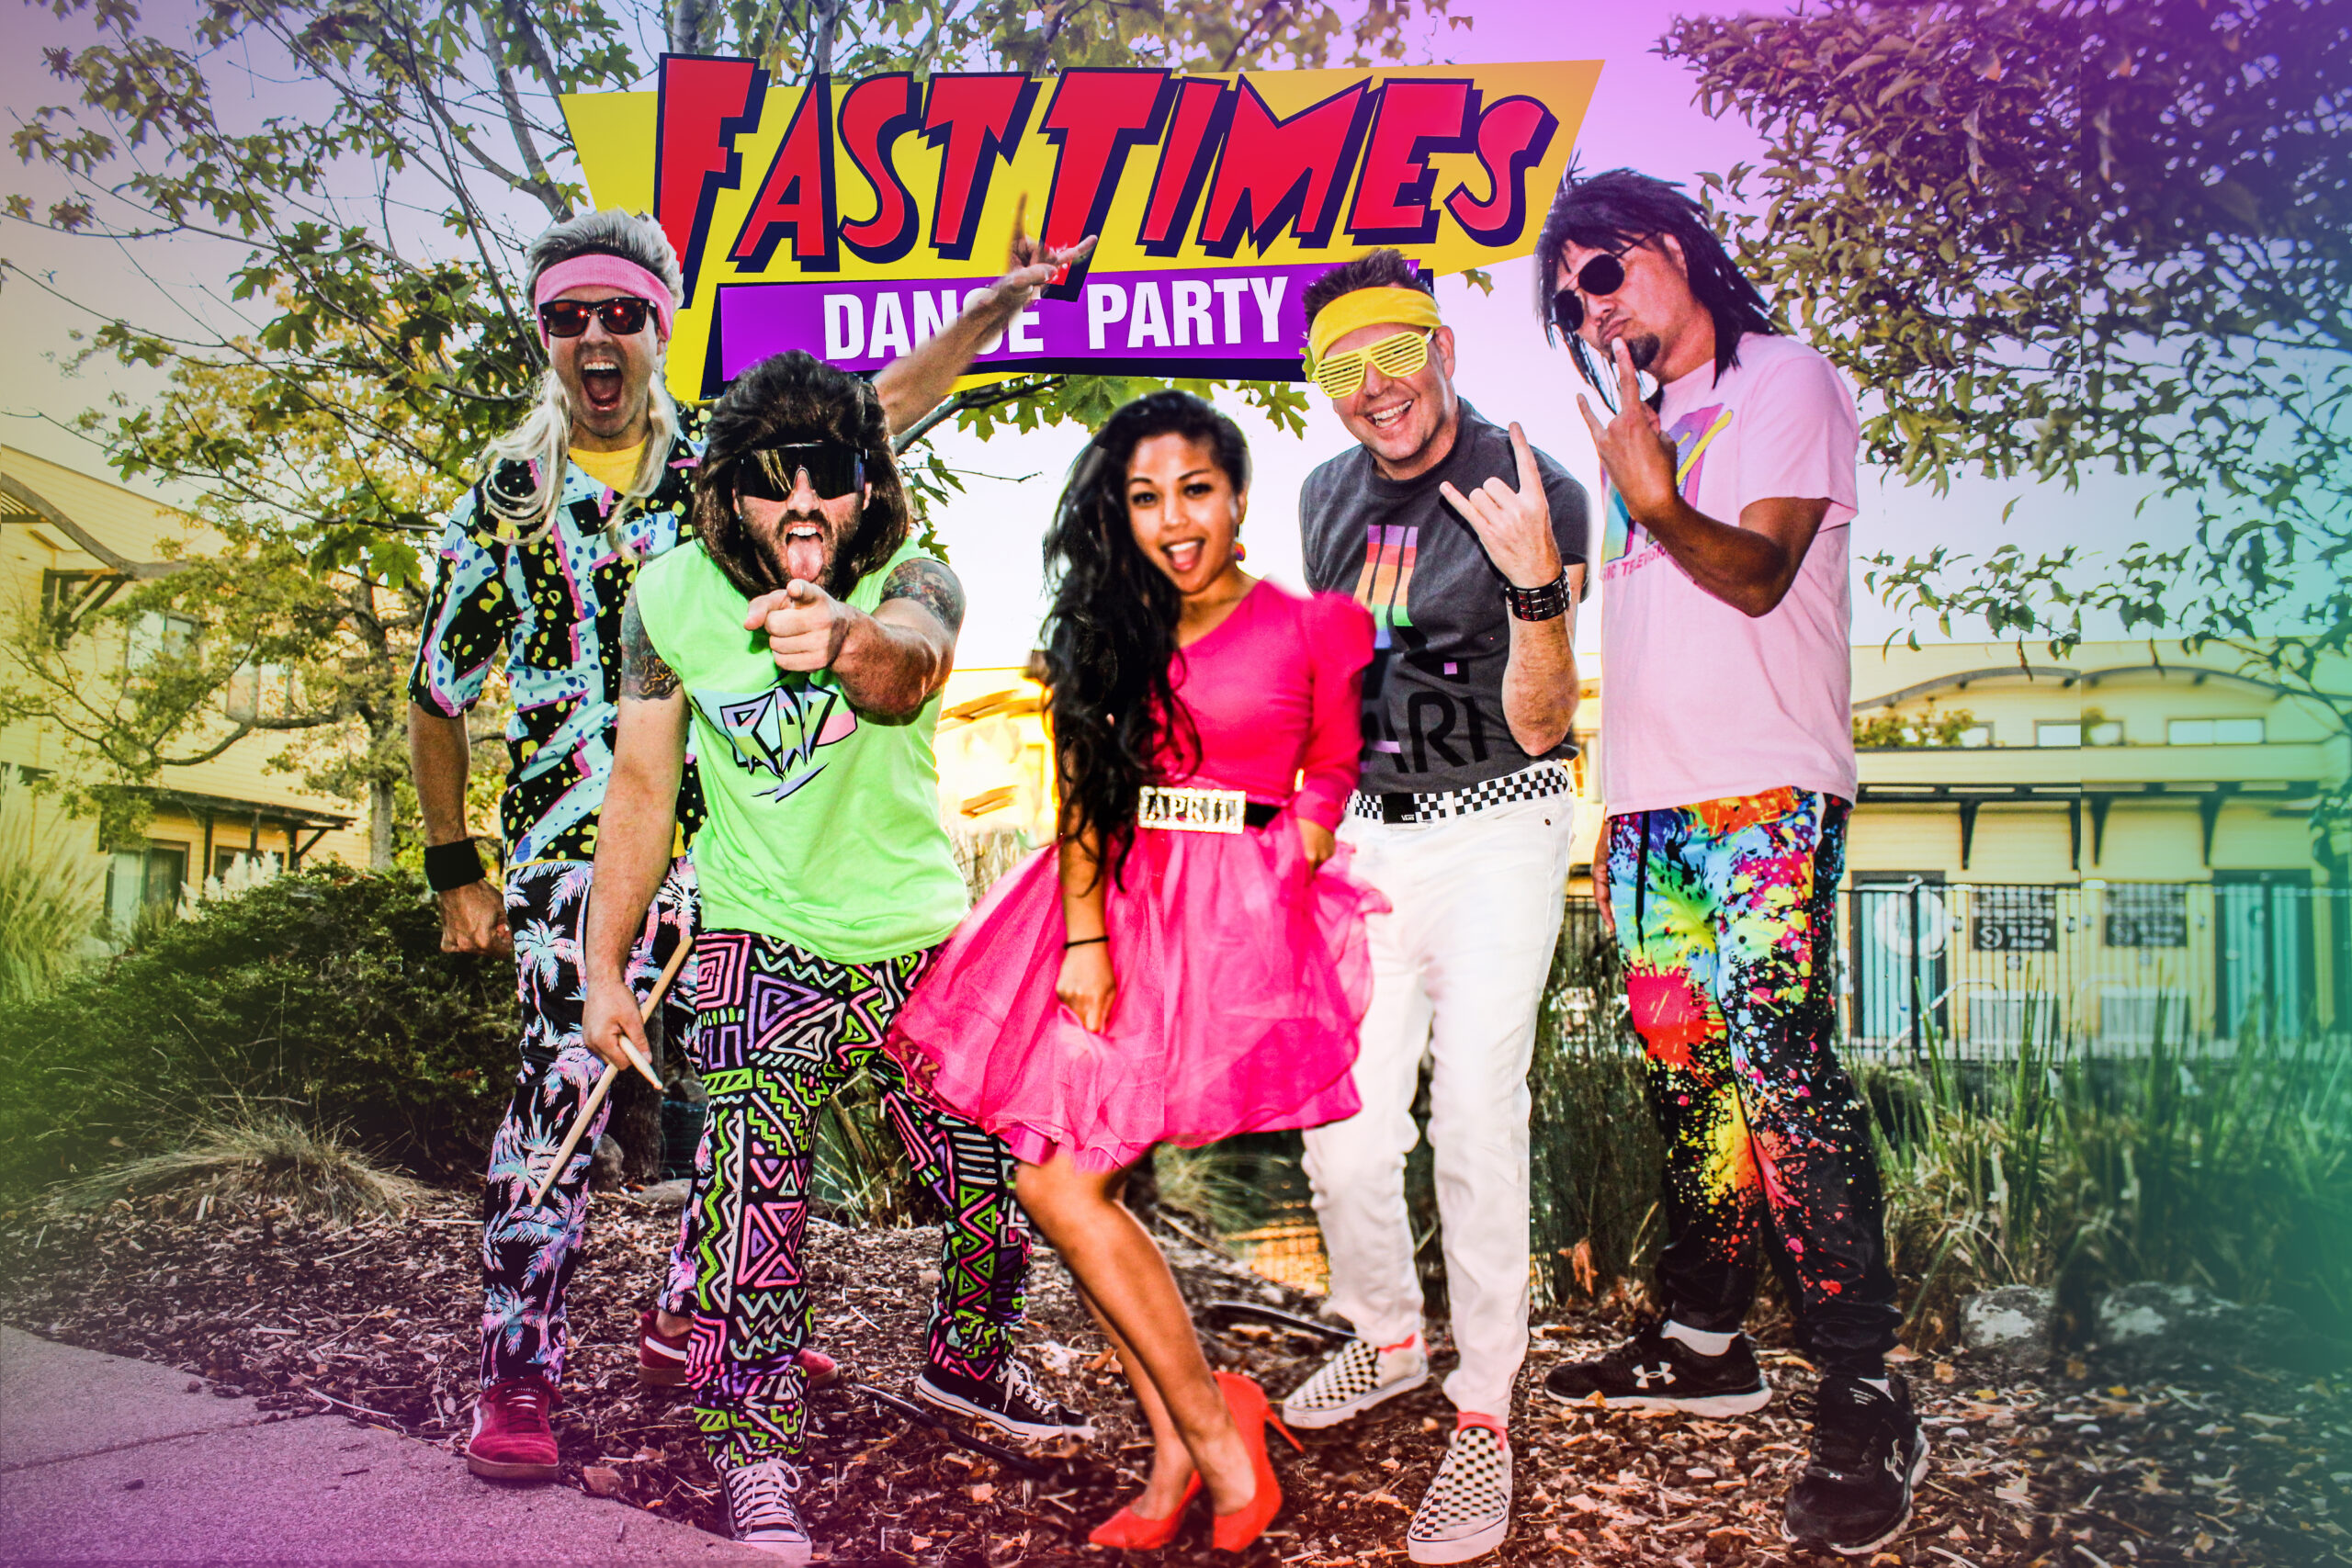 Fast Times dance party wedding, events, and party cover band